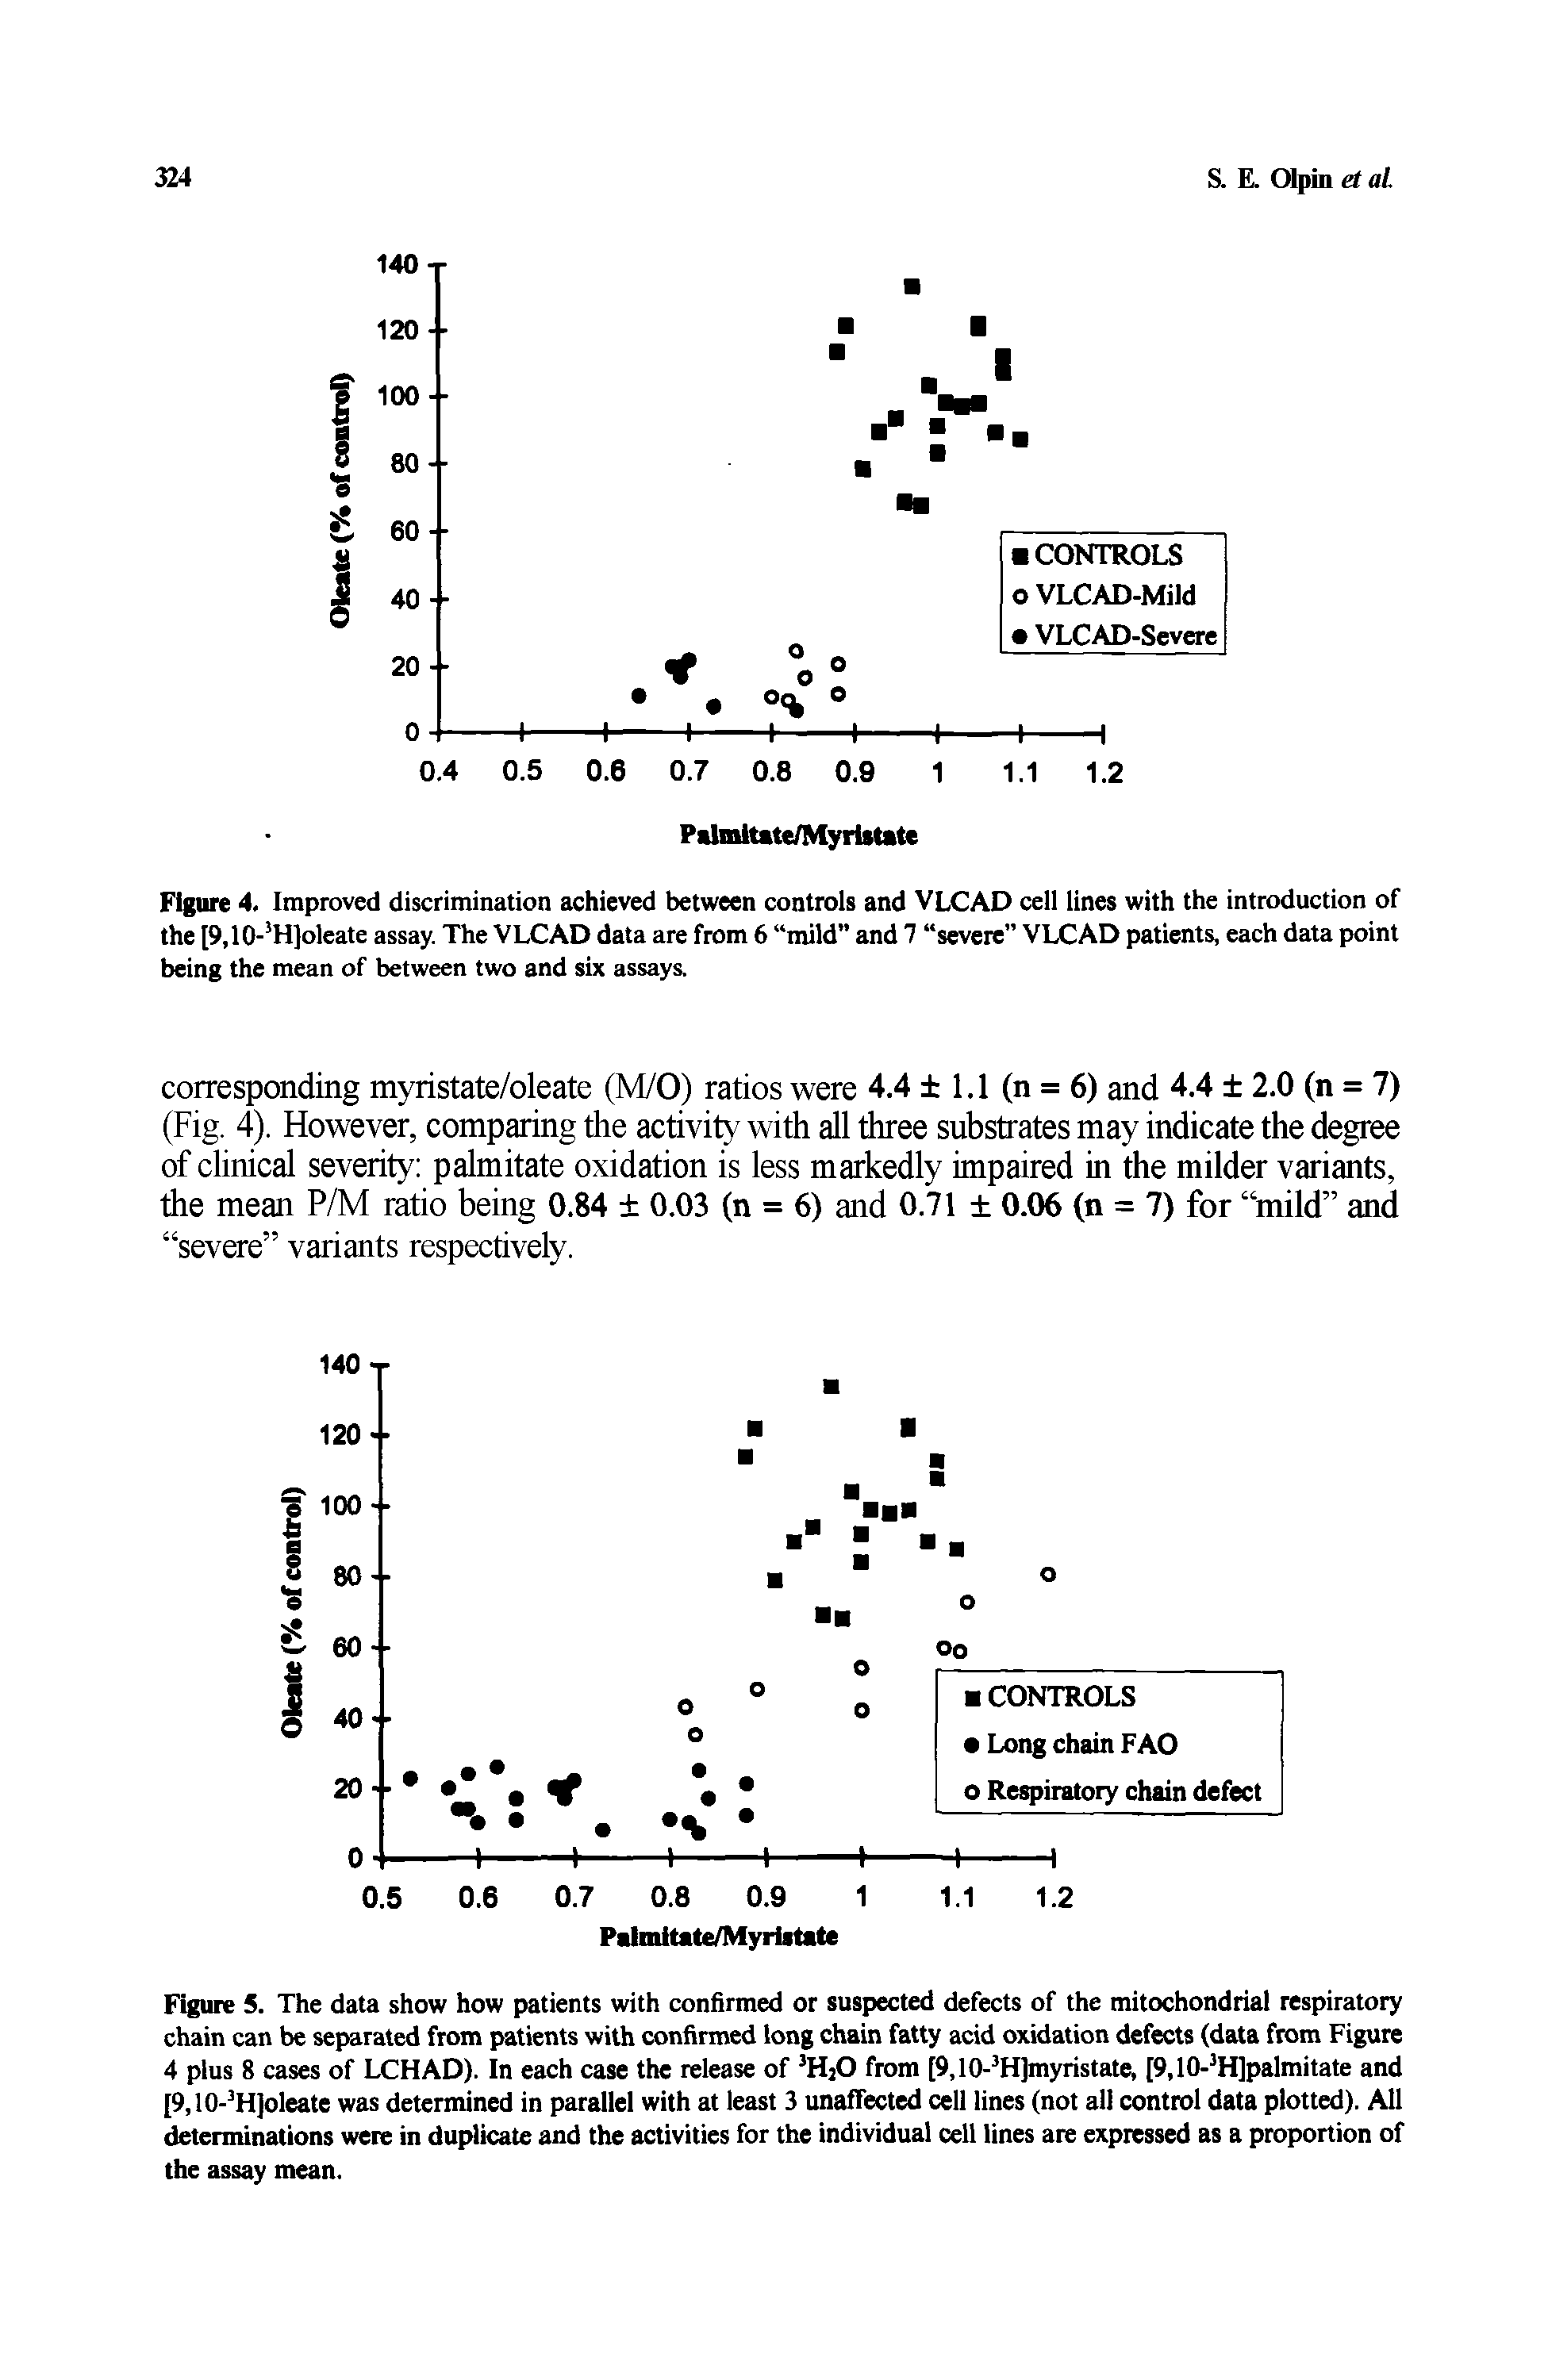 Figure 5. The data show how patients with confirmed or suspected defects of the mitochondrial respiratory chain can be separated from patients with confirmed long chain fatty acid oxidation defects (data from Figure 4 plus 8 cases of LCHAD). In each case the release of H O from [9,10- H)myristate, [9,10- H]palmitate and [9,10- H]oleate was determined in parallel with at least 3 unaffected cell lines (not all control data plotted). All determinations were in duplicate and the activities for the individual cell lines are expressed as a proportion of the assay mean.